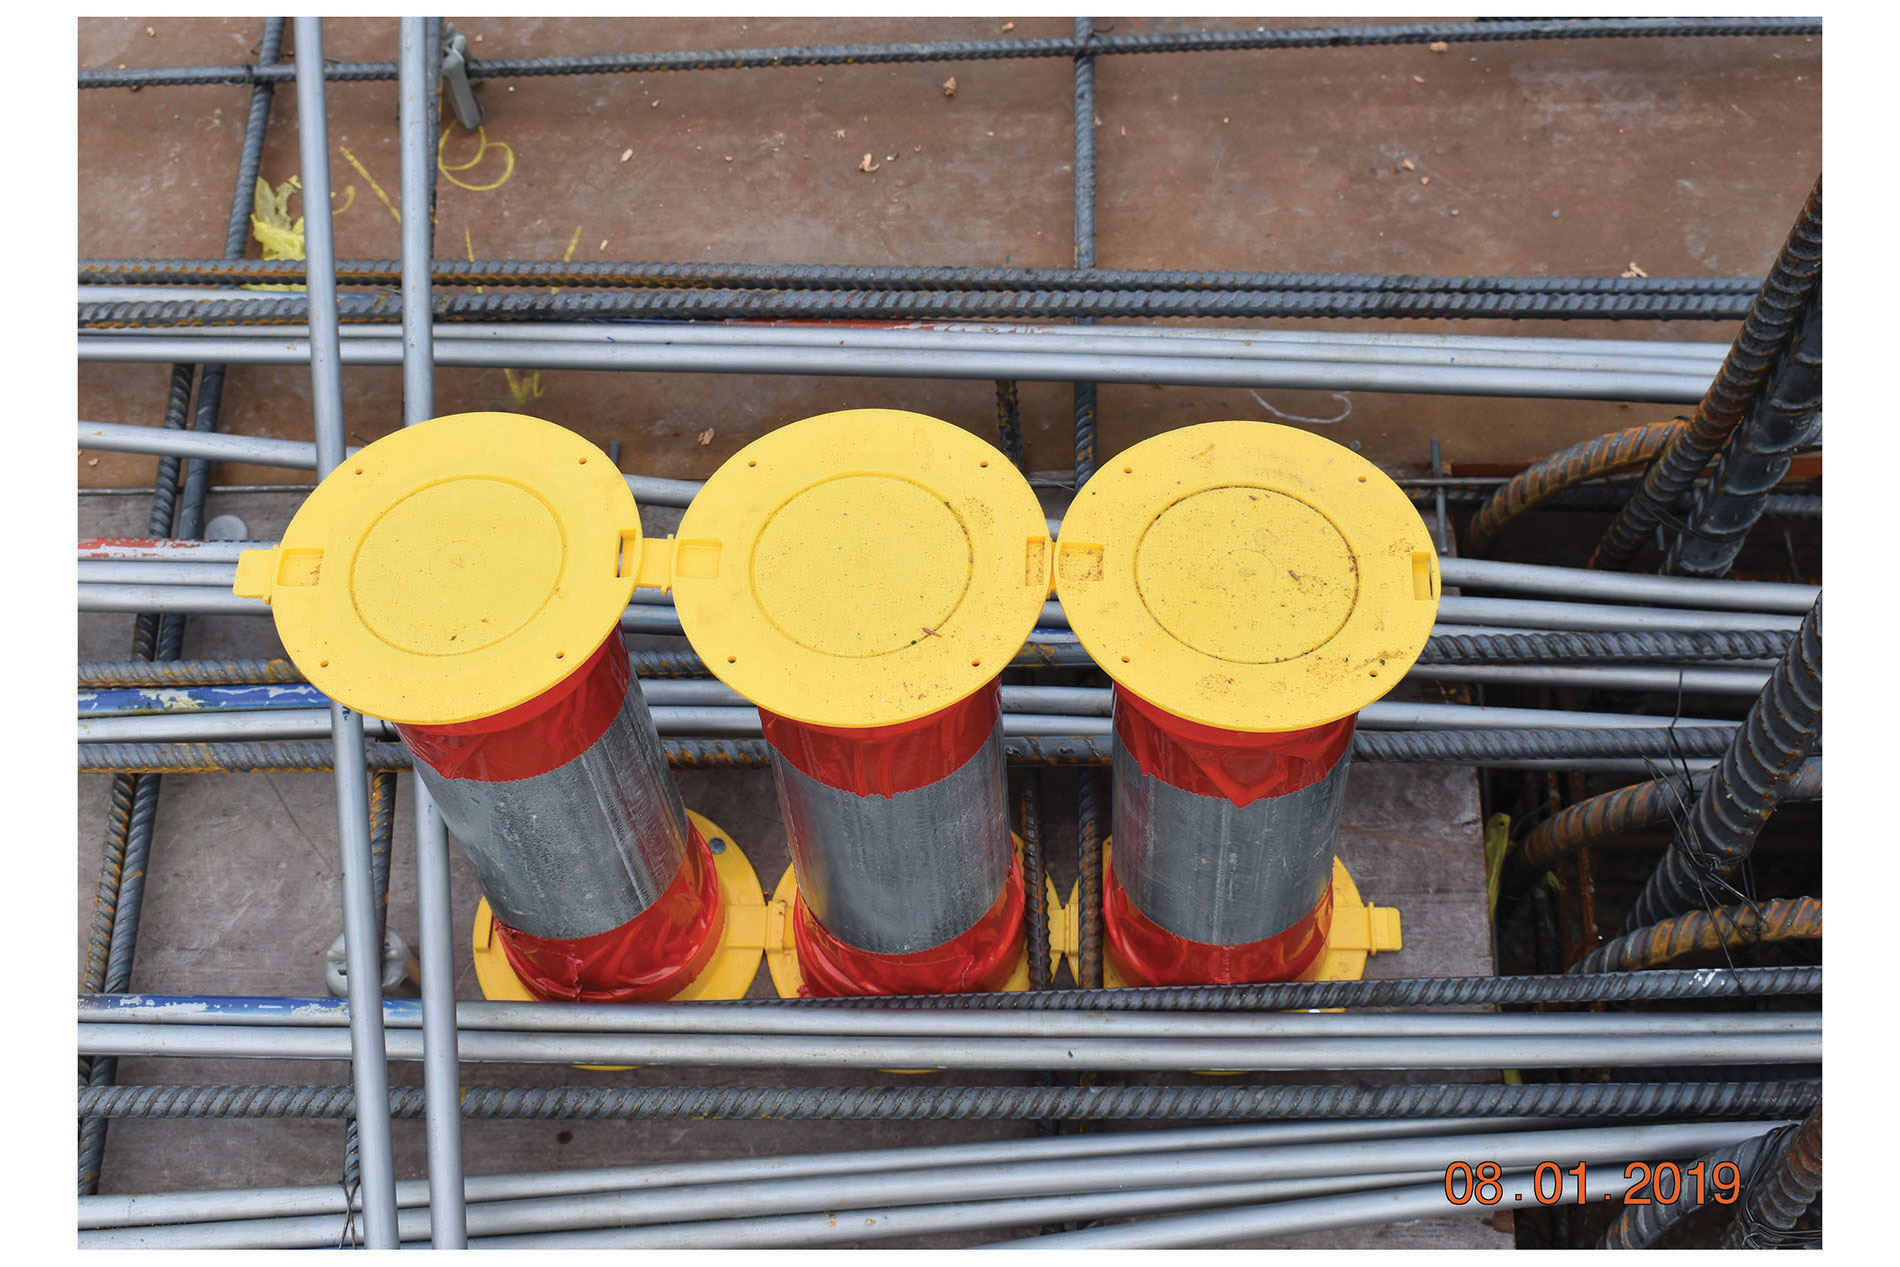 Conjoined yellow conduit caps on three metal cylinders. Image by Arlington Industries.